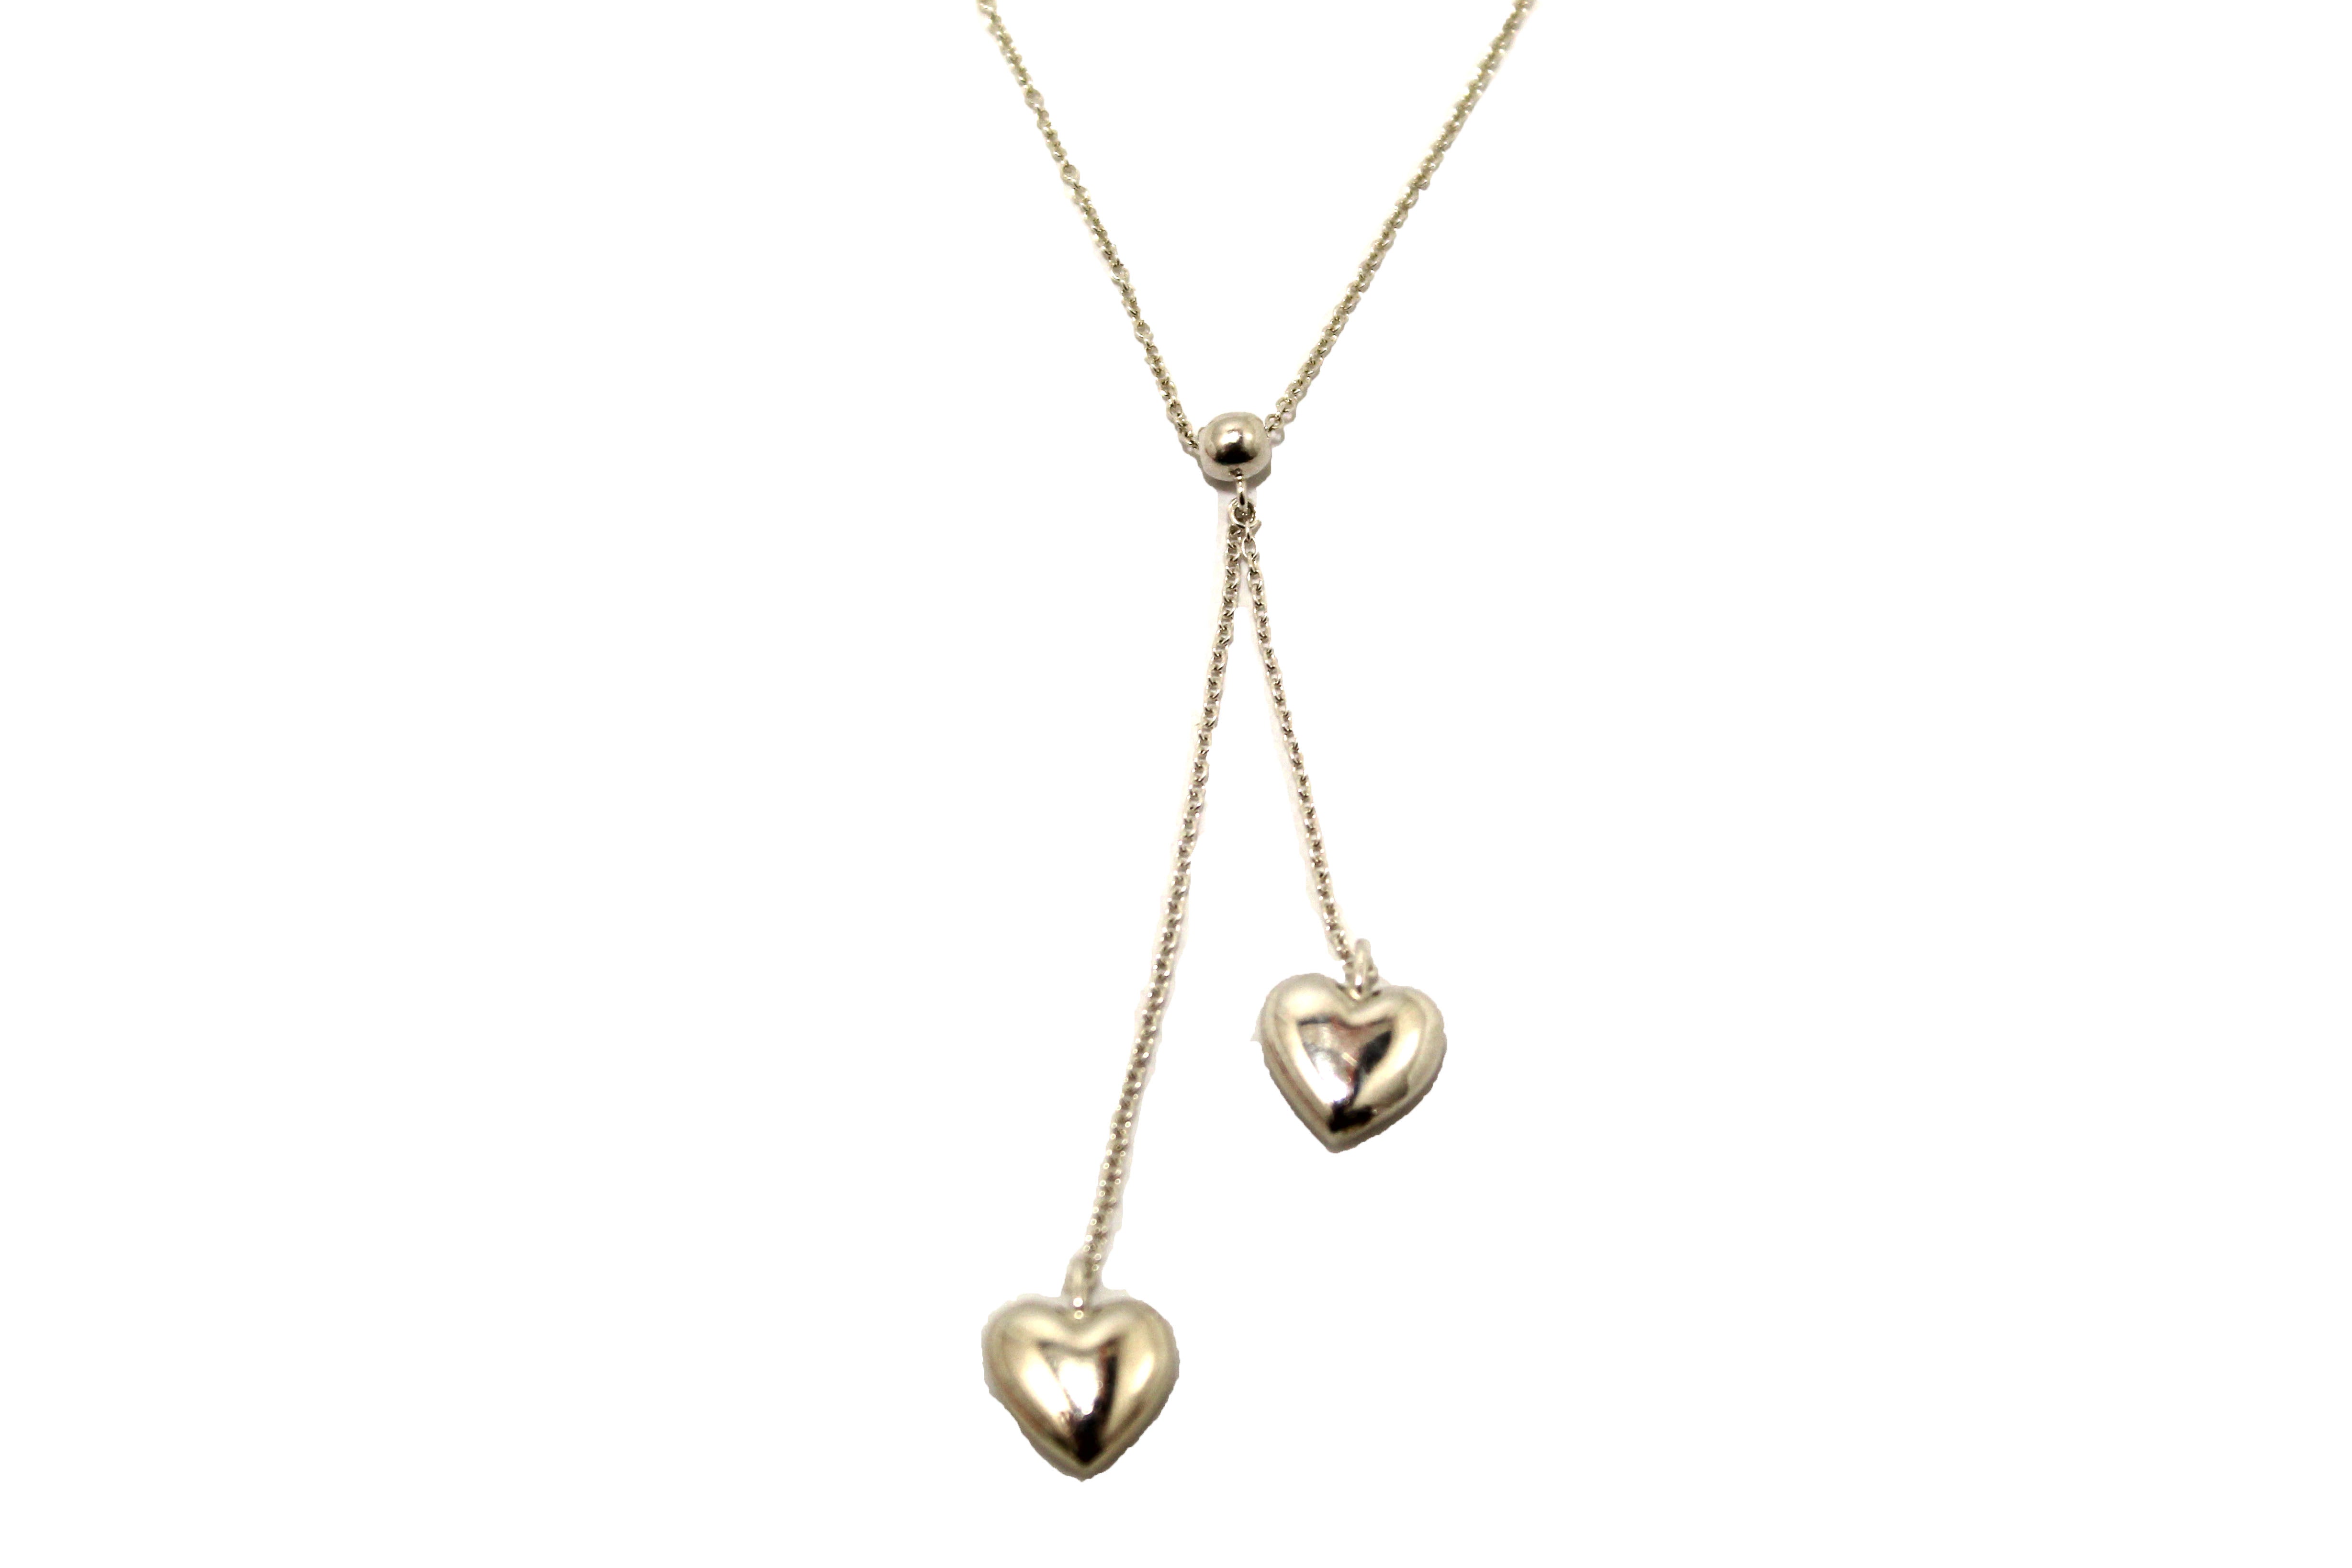 Authentic Tiffany & Co. Sterling Silver Double Drop Puffed Heart Dangling Lariat Necklace